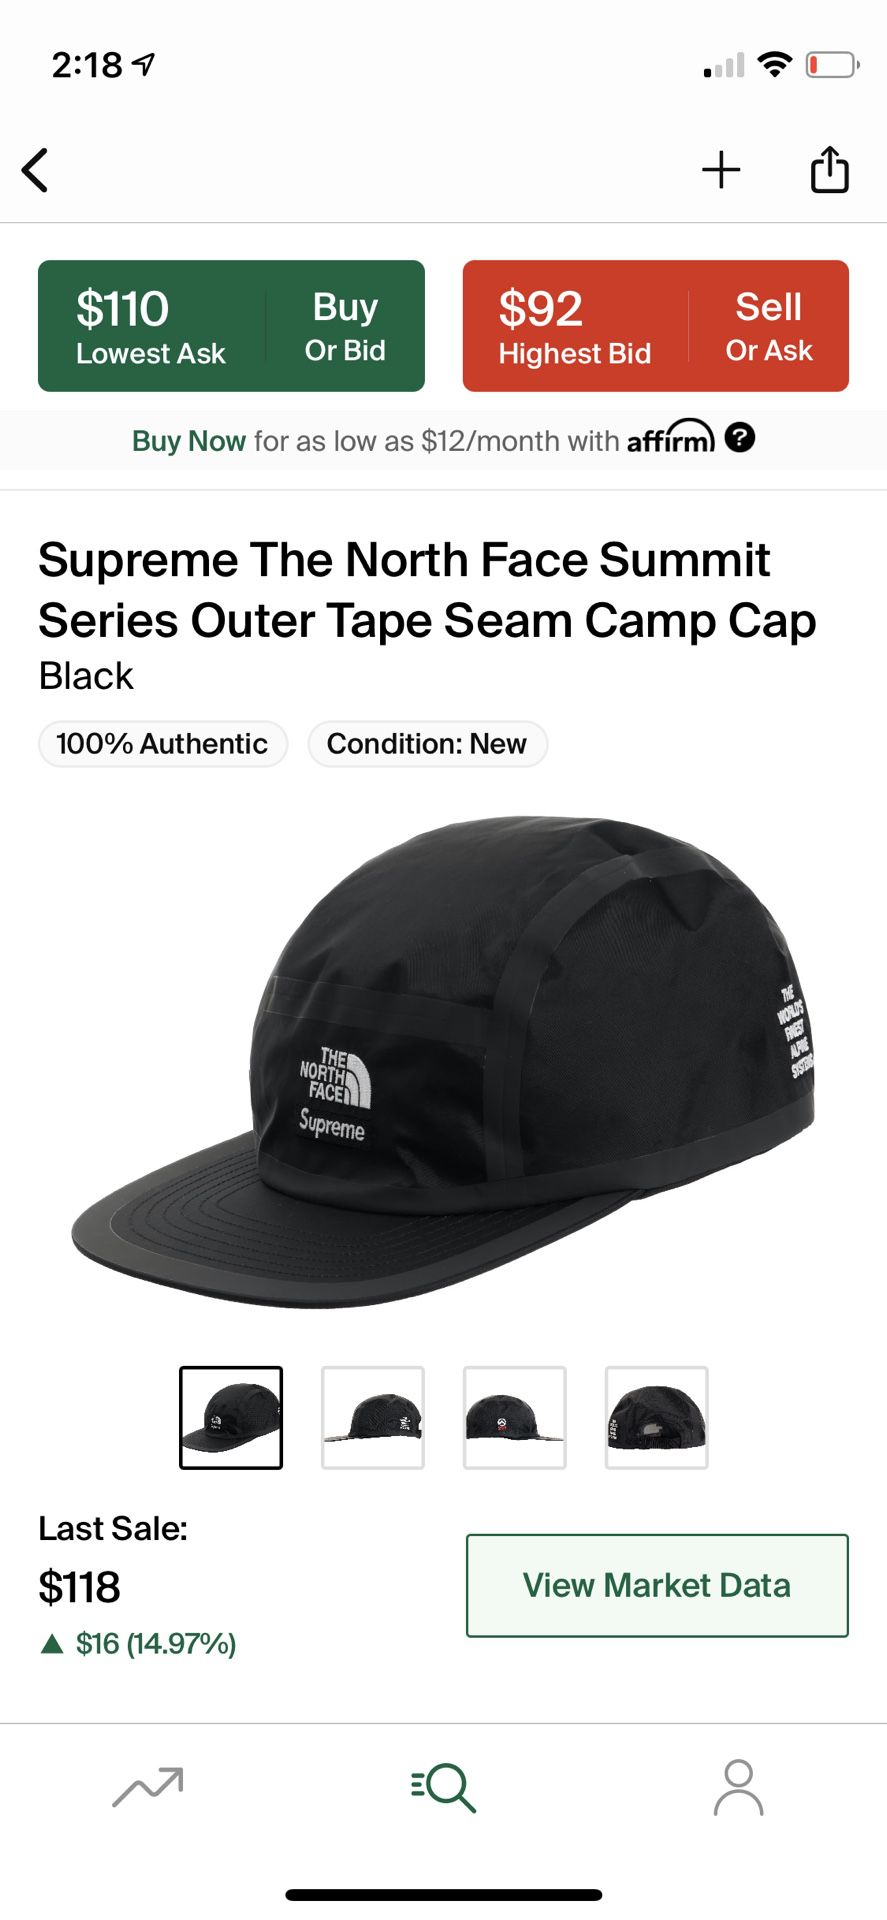 Supreme S21 North Face summit series outer Tape dream campdream camp Cap